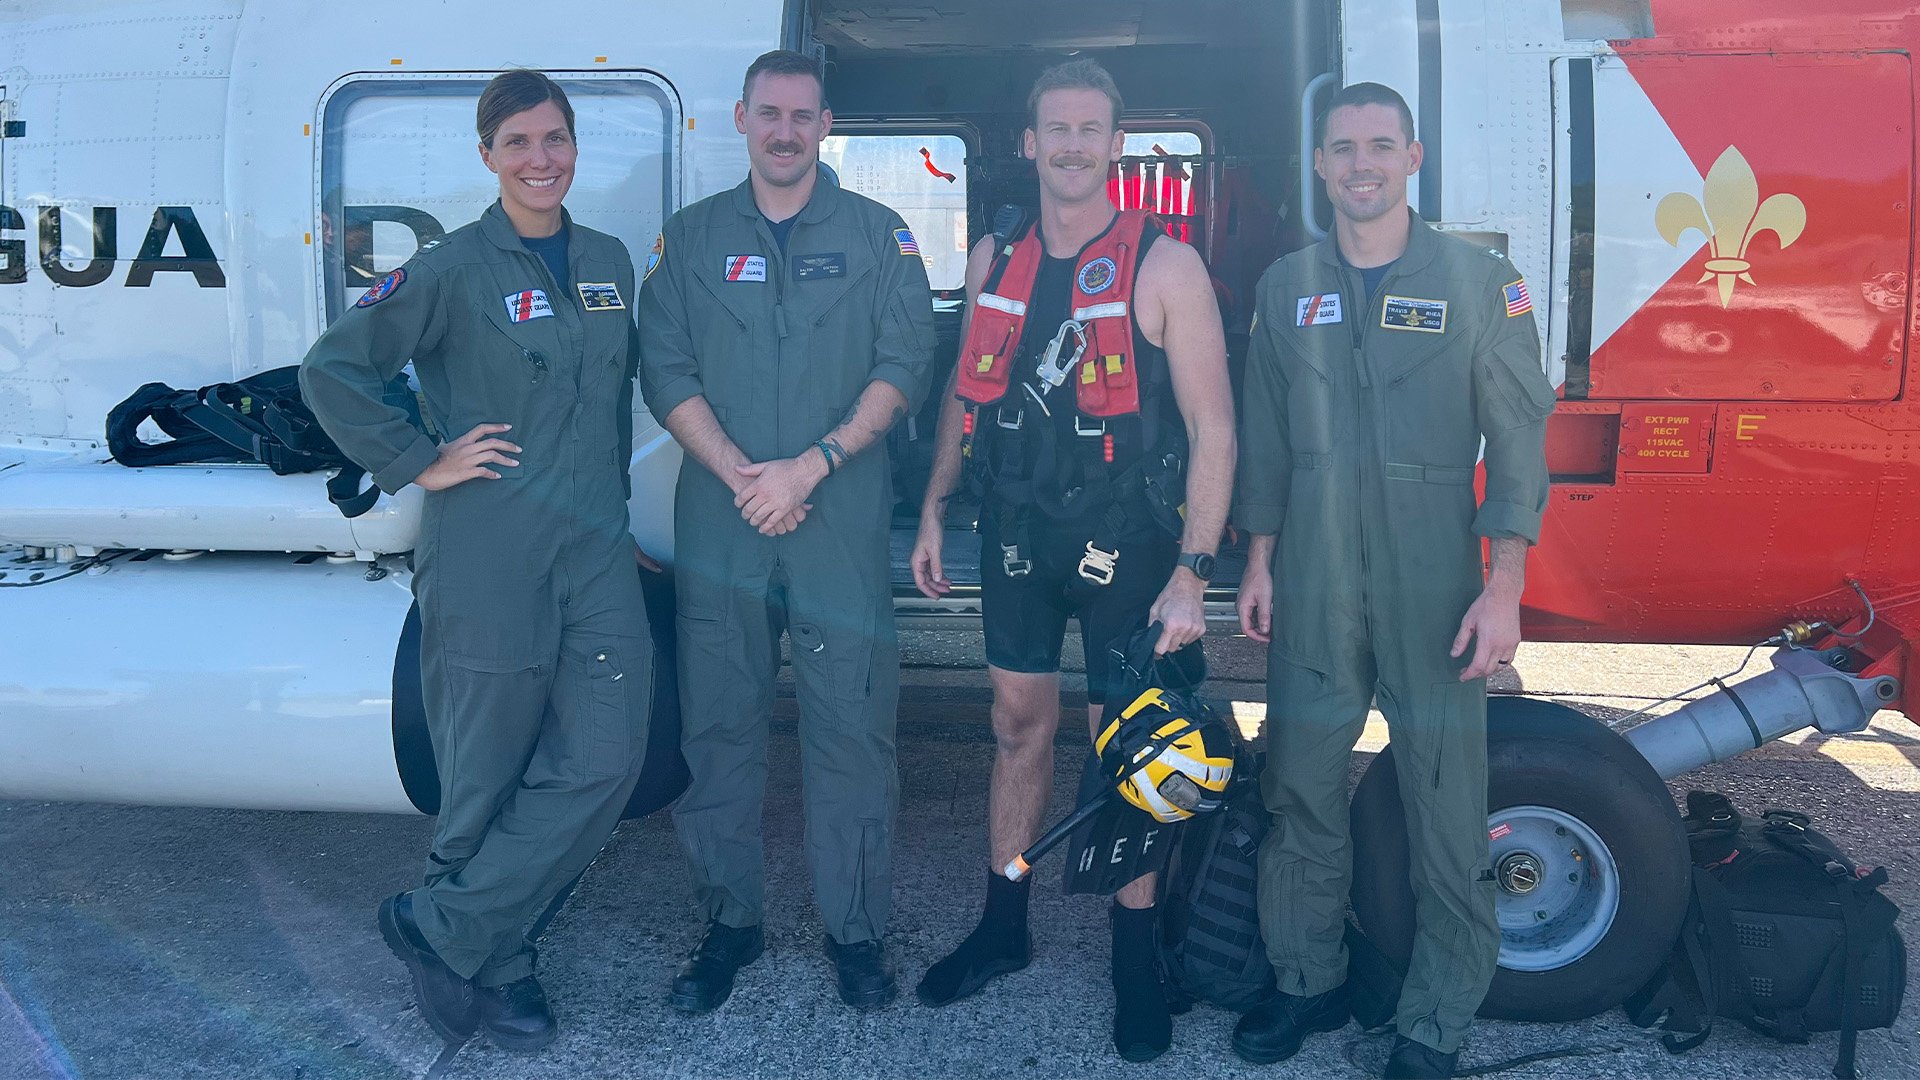 From left: US Coast Guard Lt. Katy Caraway, Aviation Maintenance Technician 2nd Class Dalton Goetsch, rescue swimmer Aviation Survival Technician 2nd Class Richard “Dicky” Hoefle, and Lt. Travis Rhea, an Air Station New Orleans MH-60T Jayhawk aircrew credited with rescuing three missing boaters off Louisiana on Oct. 9, 2022. US Coast Guard photo.